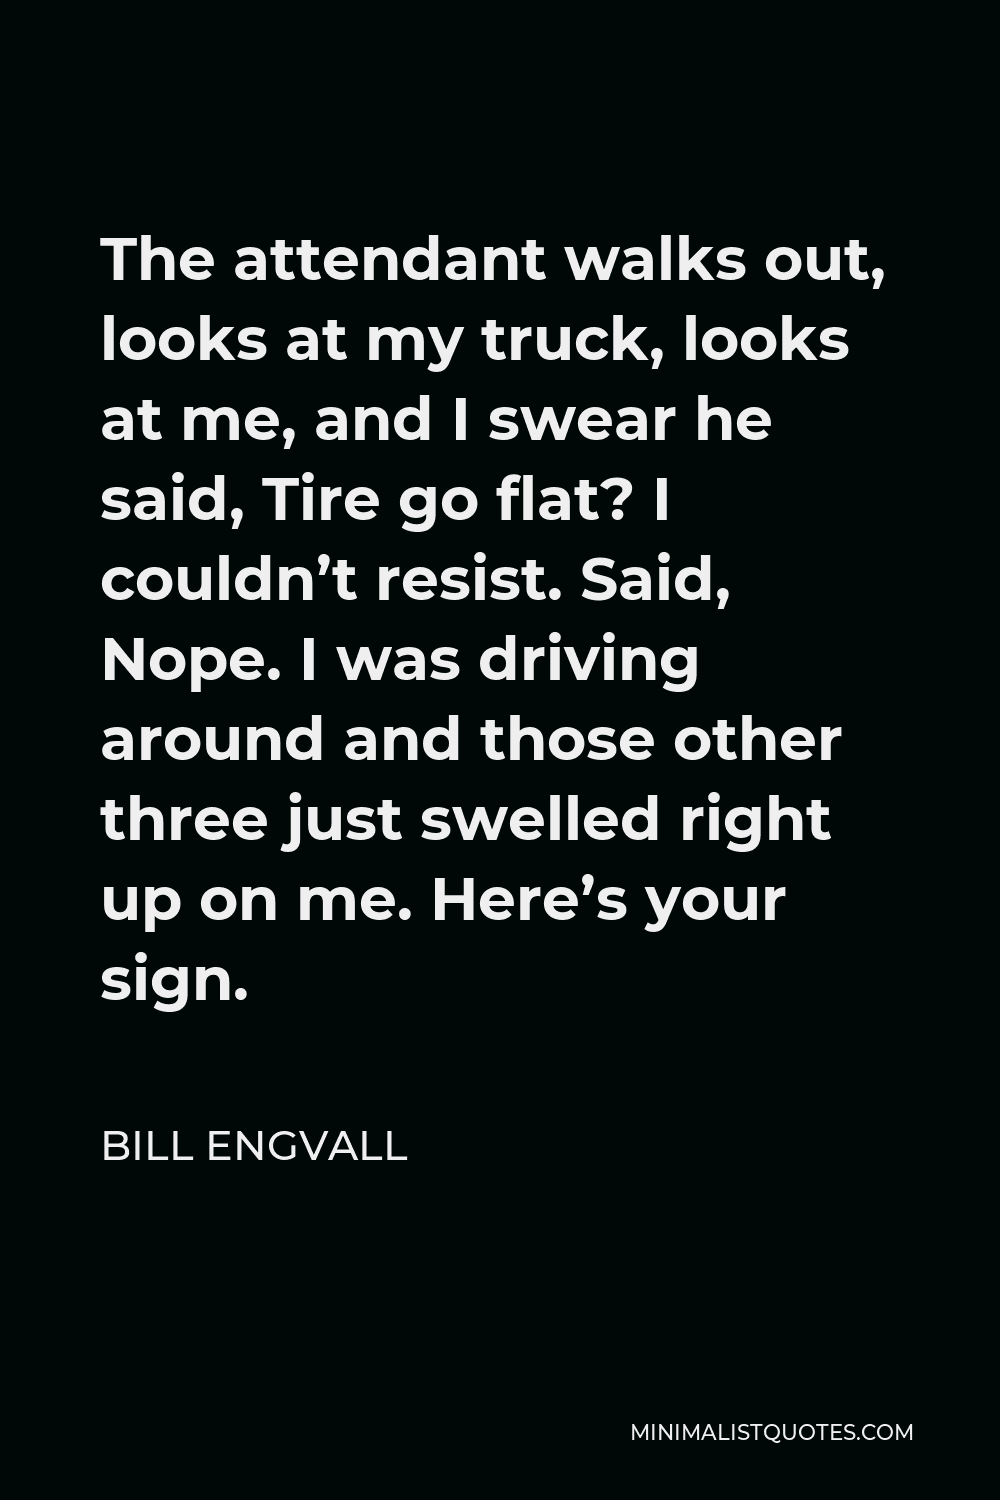 Bill Engvall Quote - The attendant walks out, looks at my truck, looks at me, and I swear he said, Tire go flat? I couldn’t resist. Said, Nope. I was driving around and those other three just swelled right up on me. Here’s your sign.